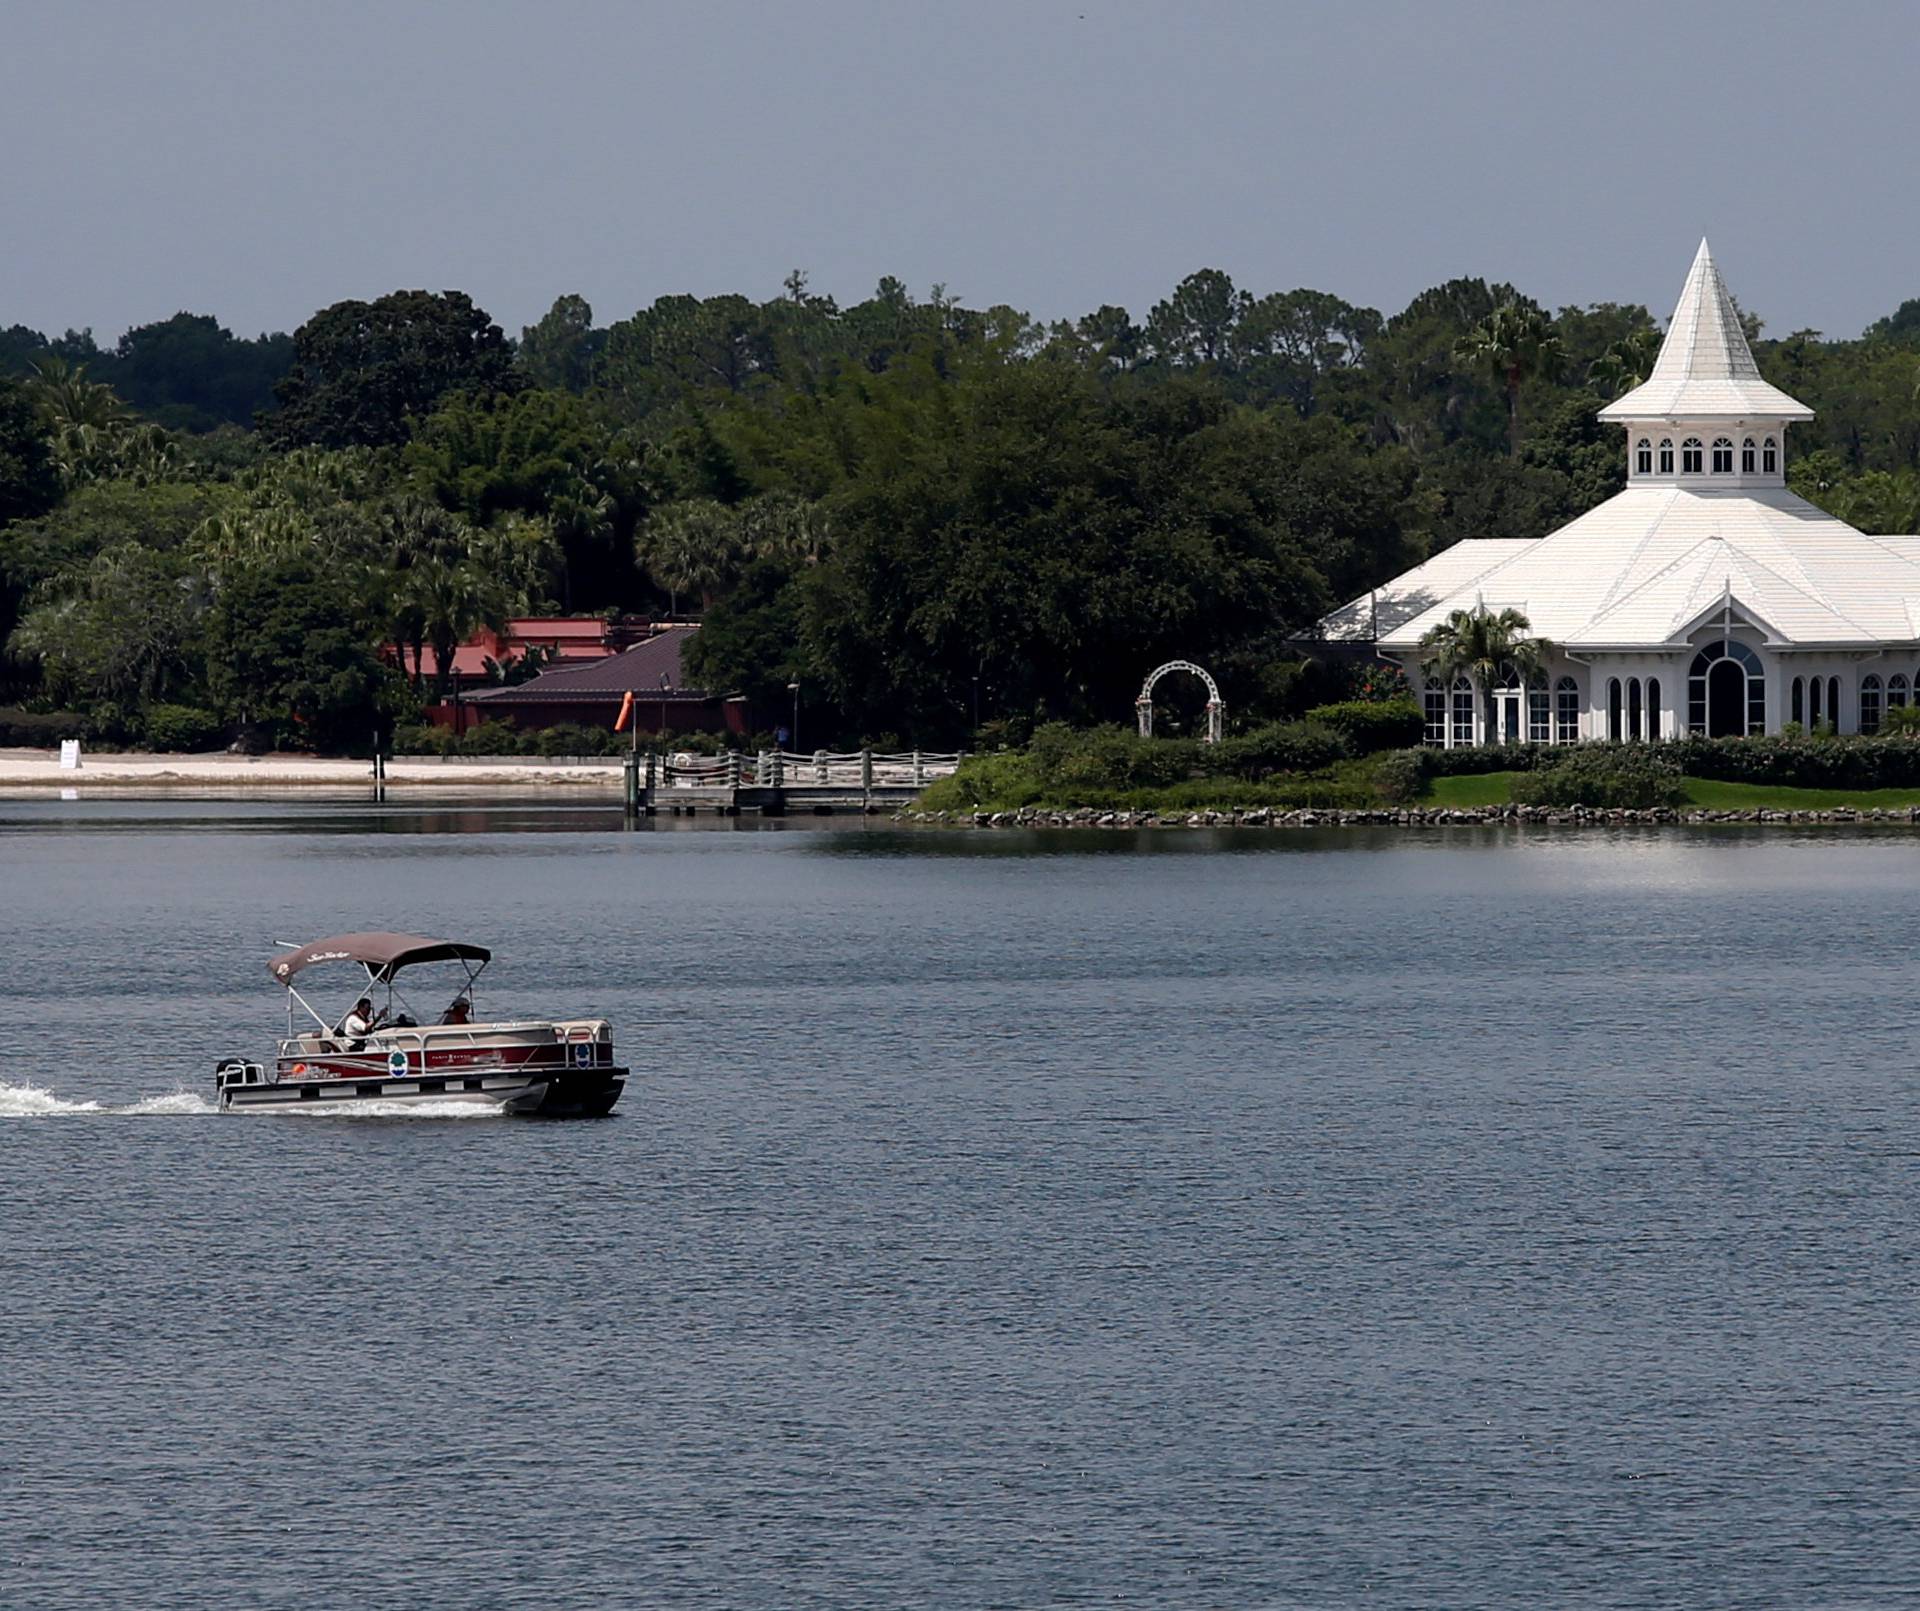 A search boat is seen in the Seven Seas Lagoon, in front of a beach at the Grand Floridian, at the Walt Disney World resort in Orlando, Florida